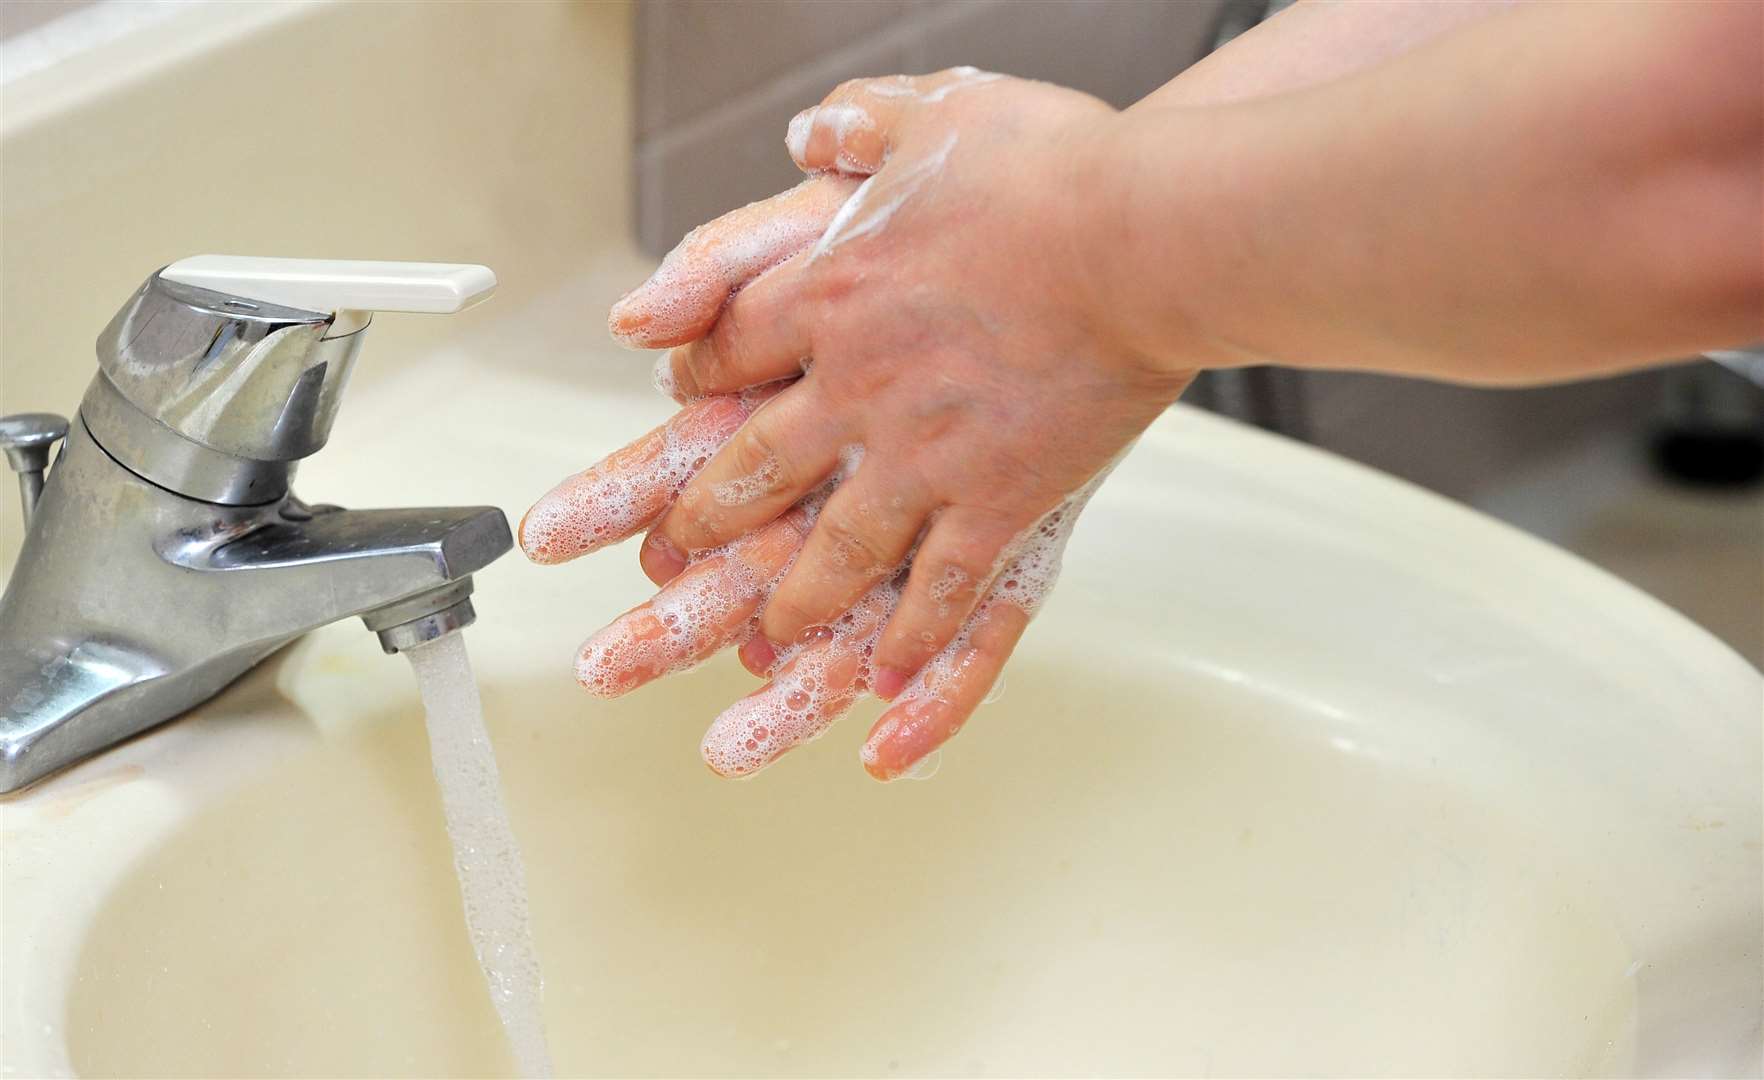 Washing your hands regularly can help prevent the spread of the coronavirus